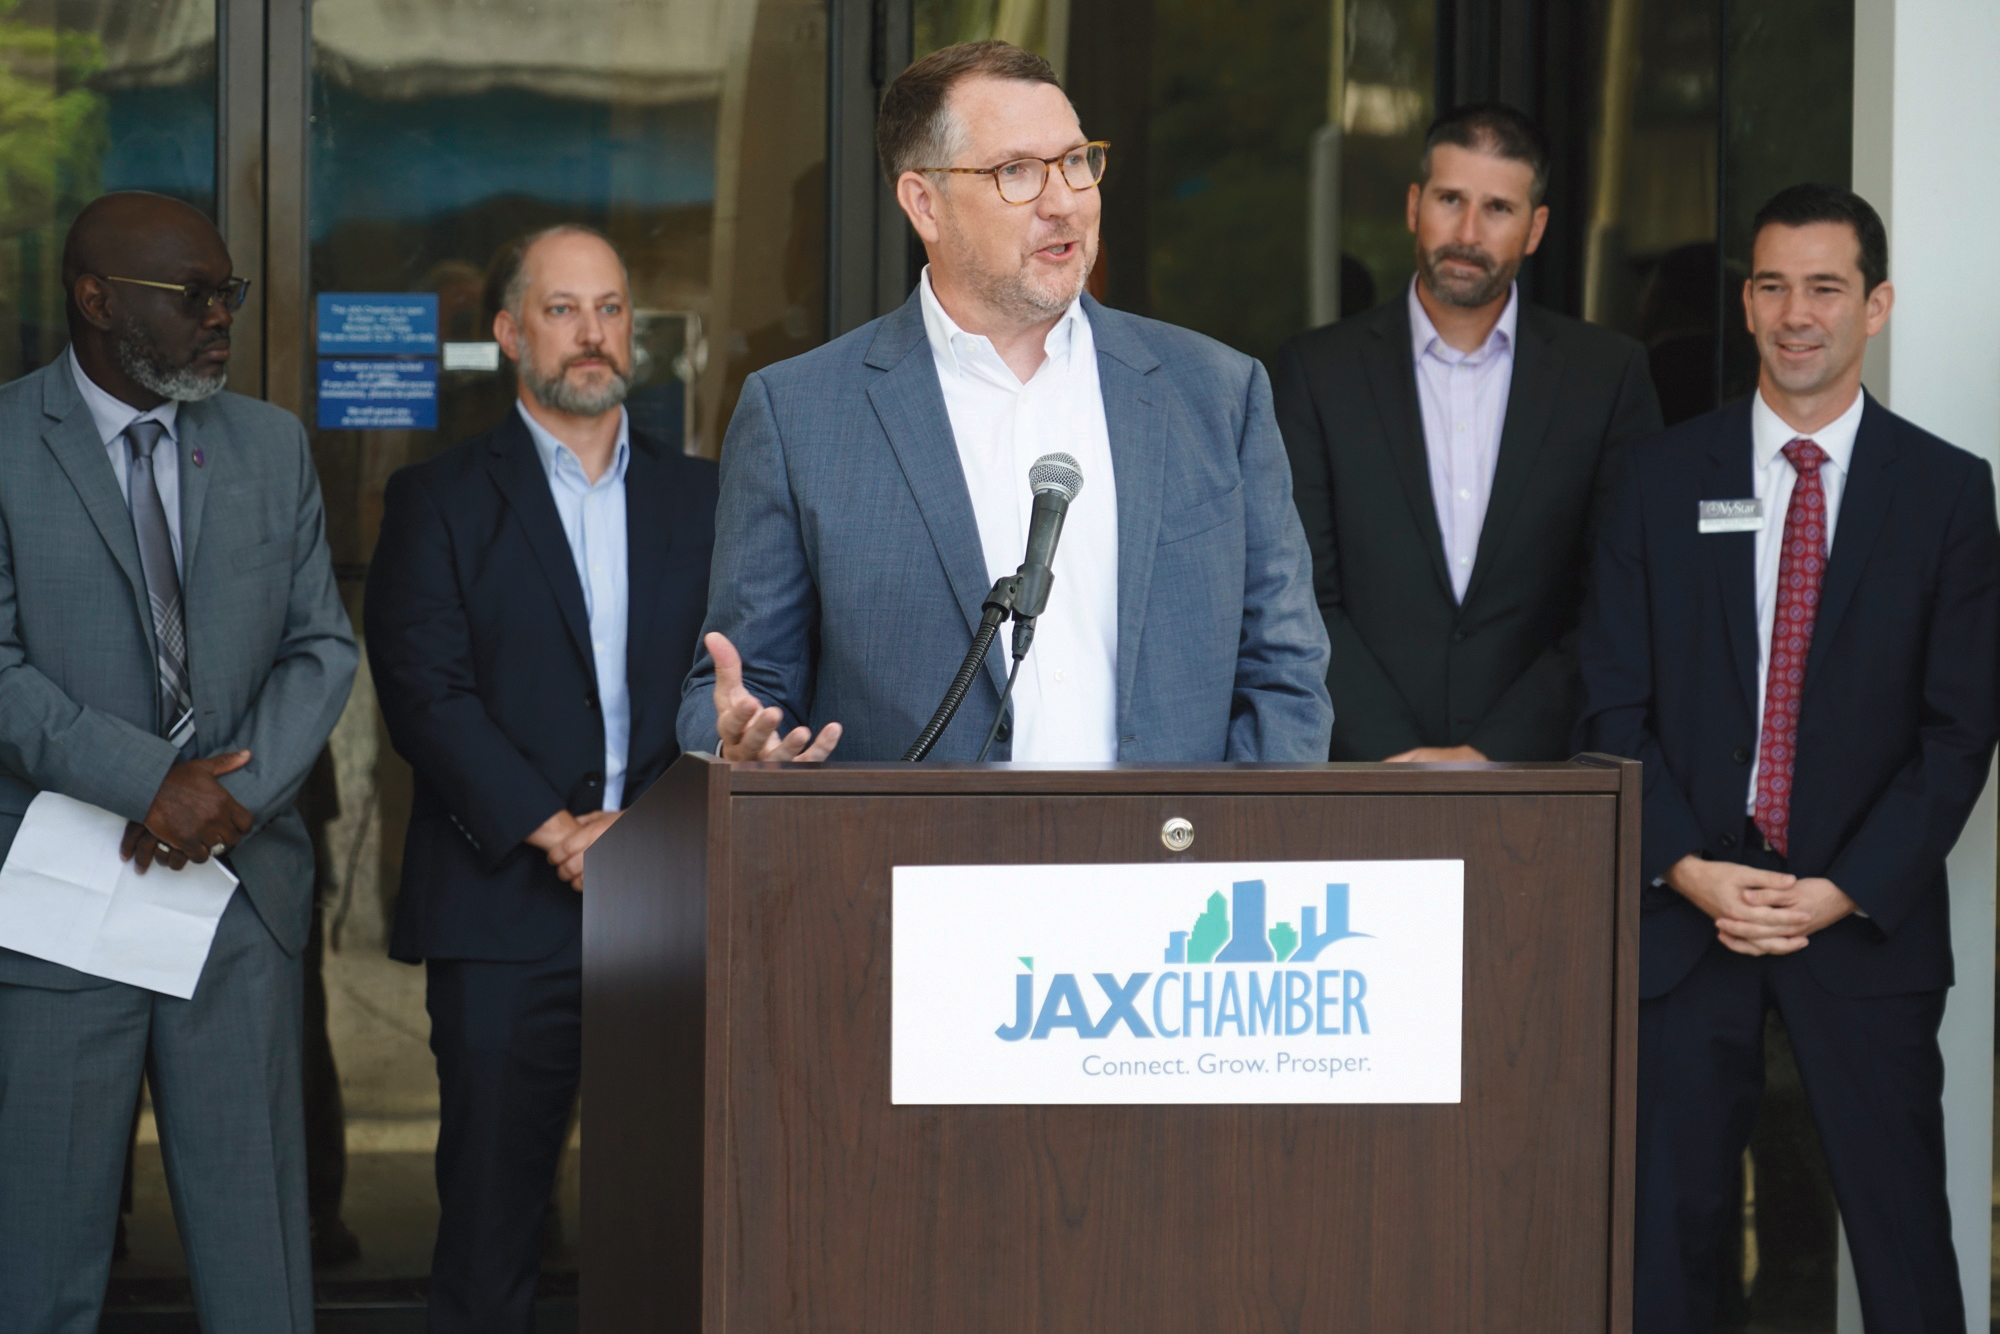 Nymbus Chairman and CEO Jeffery Kendall announced his company’s move to Jacksonville Oct. 5 at the JAX Chamber offices.